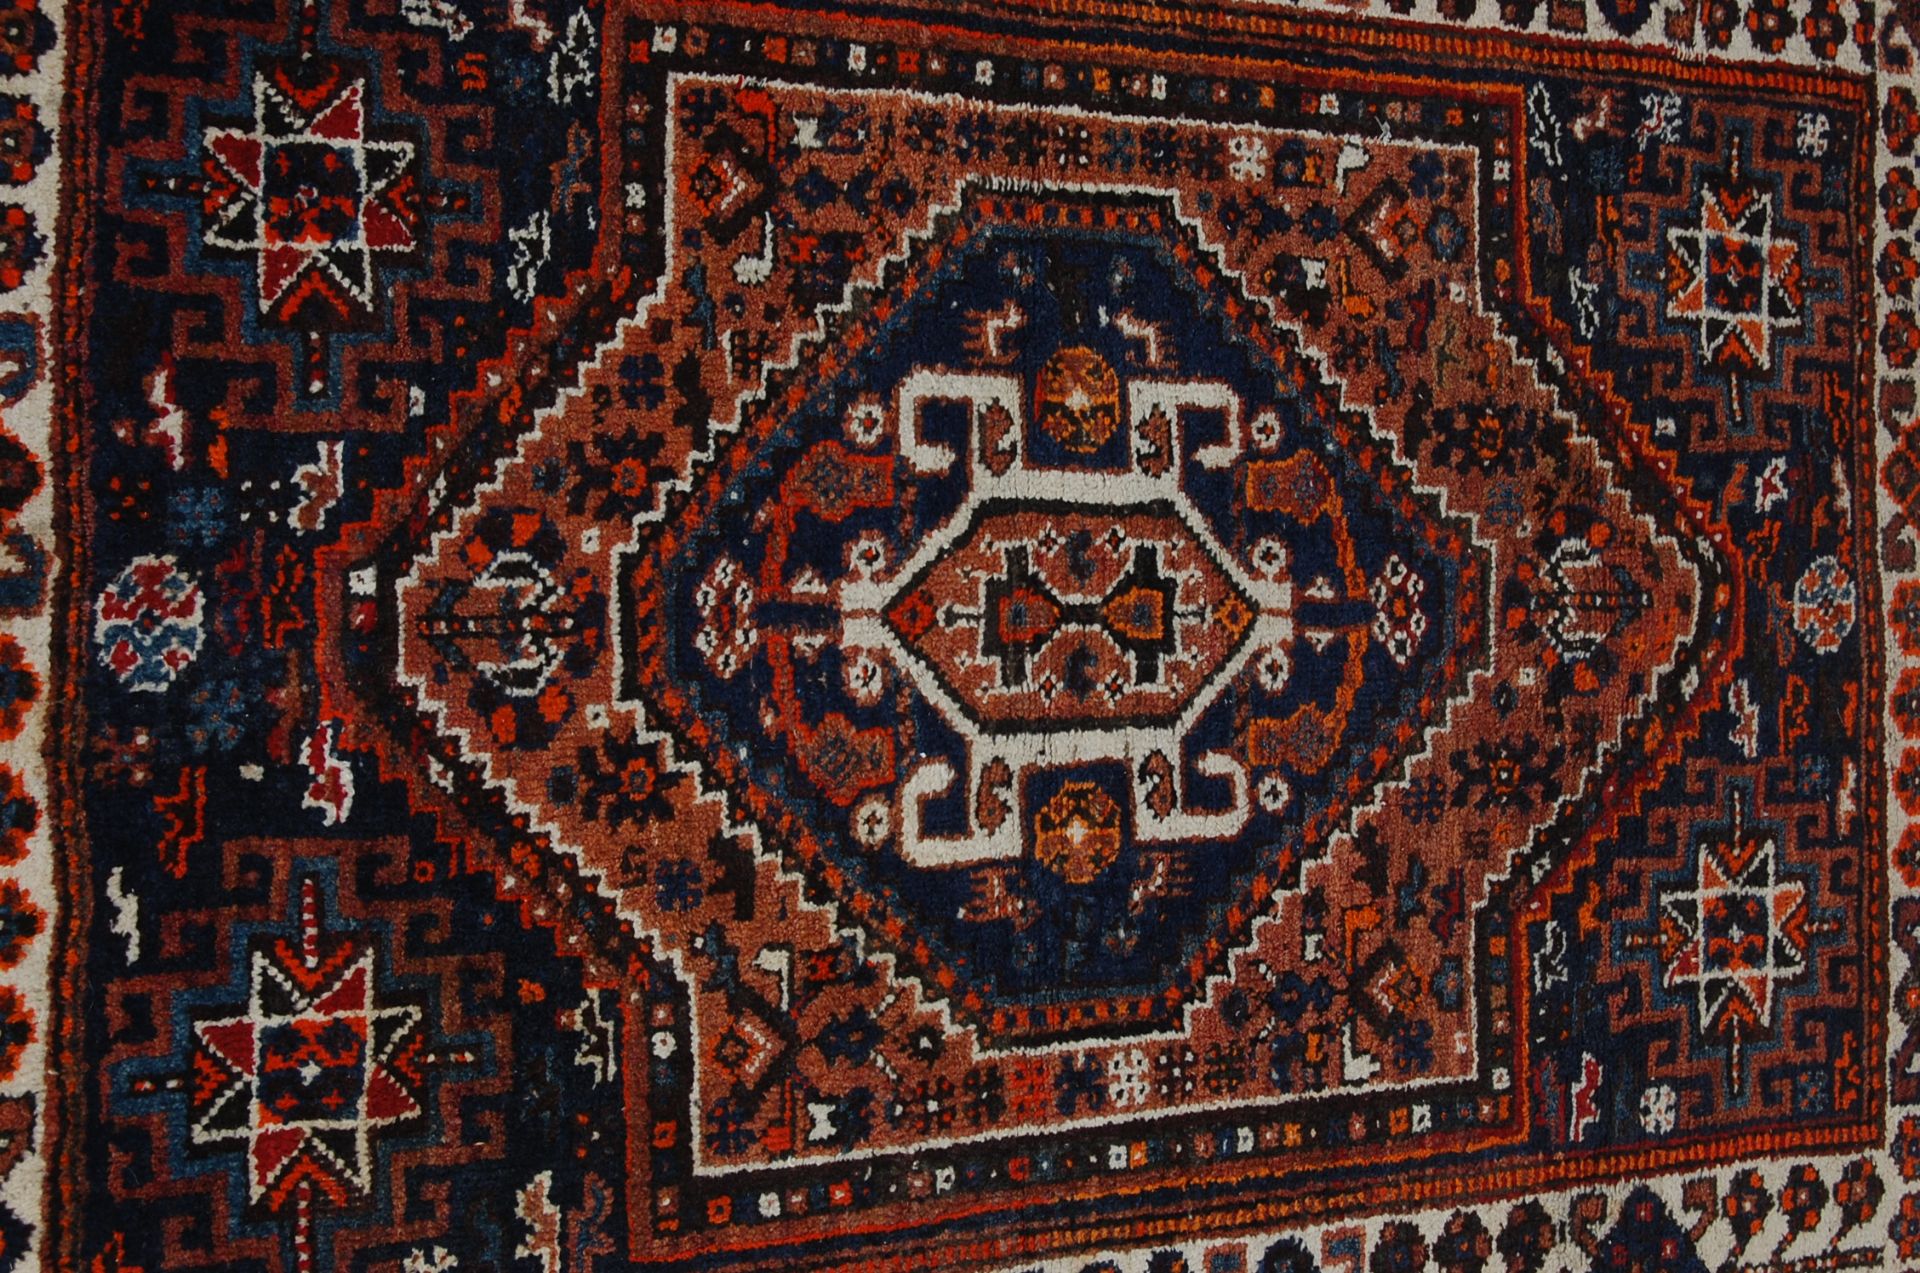 EARLY 20TH CENTURY NATURAL DYED AND HAND-WOVEN WOOL AFGHAN RUG / CARPET - Image 2 of 6